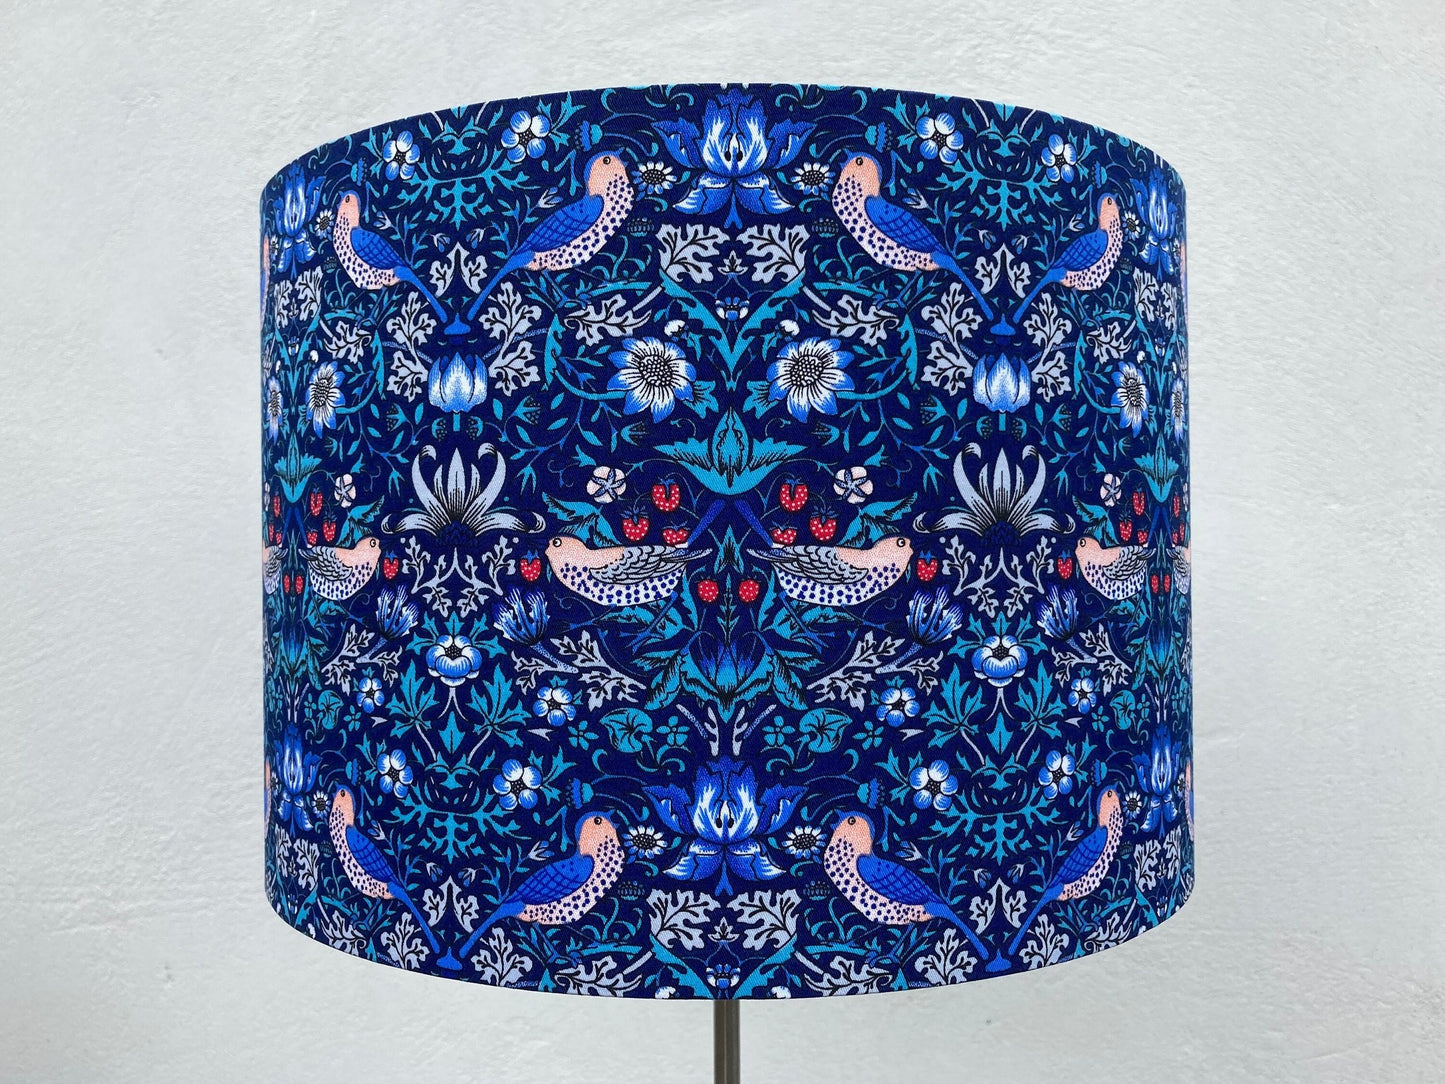 Floral Bird Lampshade William Morris Strawberry Thief Style Fabric for Table Lamps or Ceiling Lights